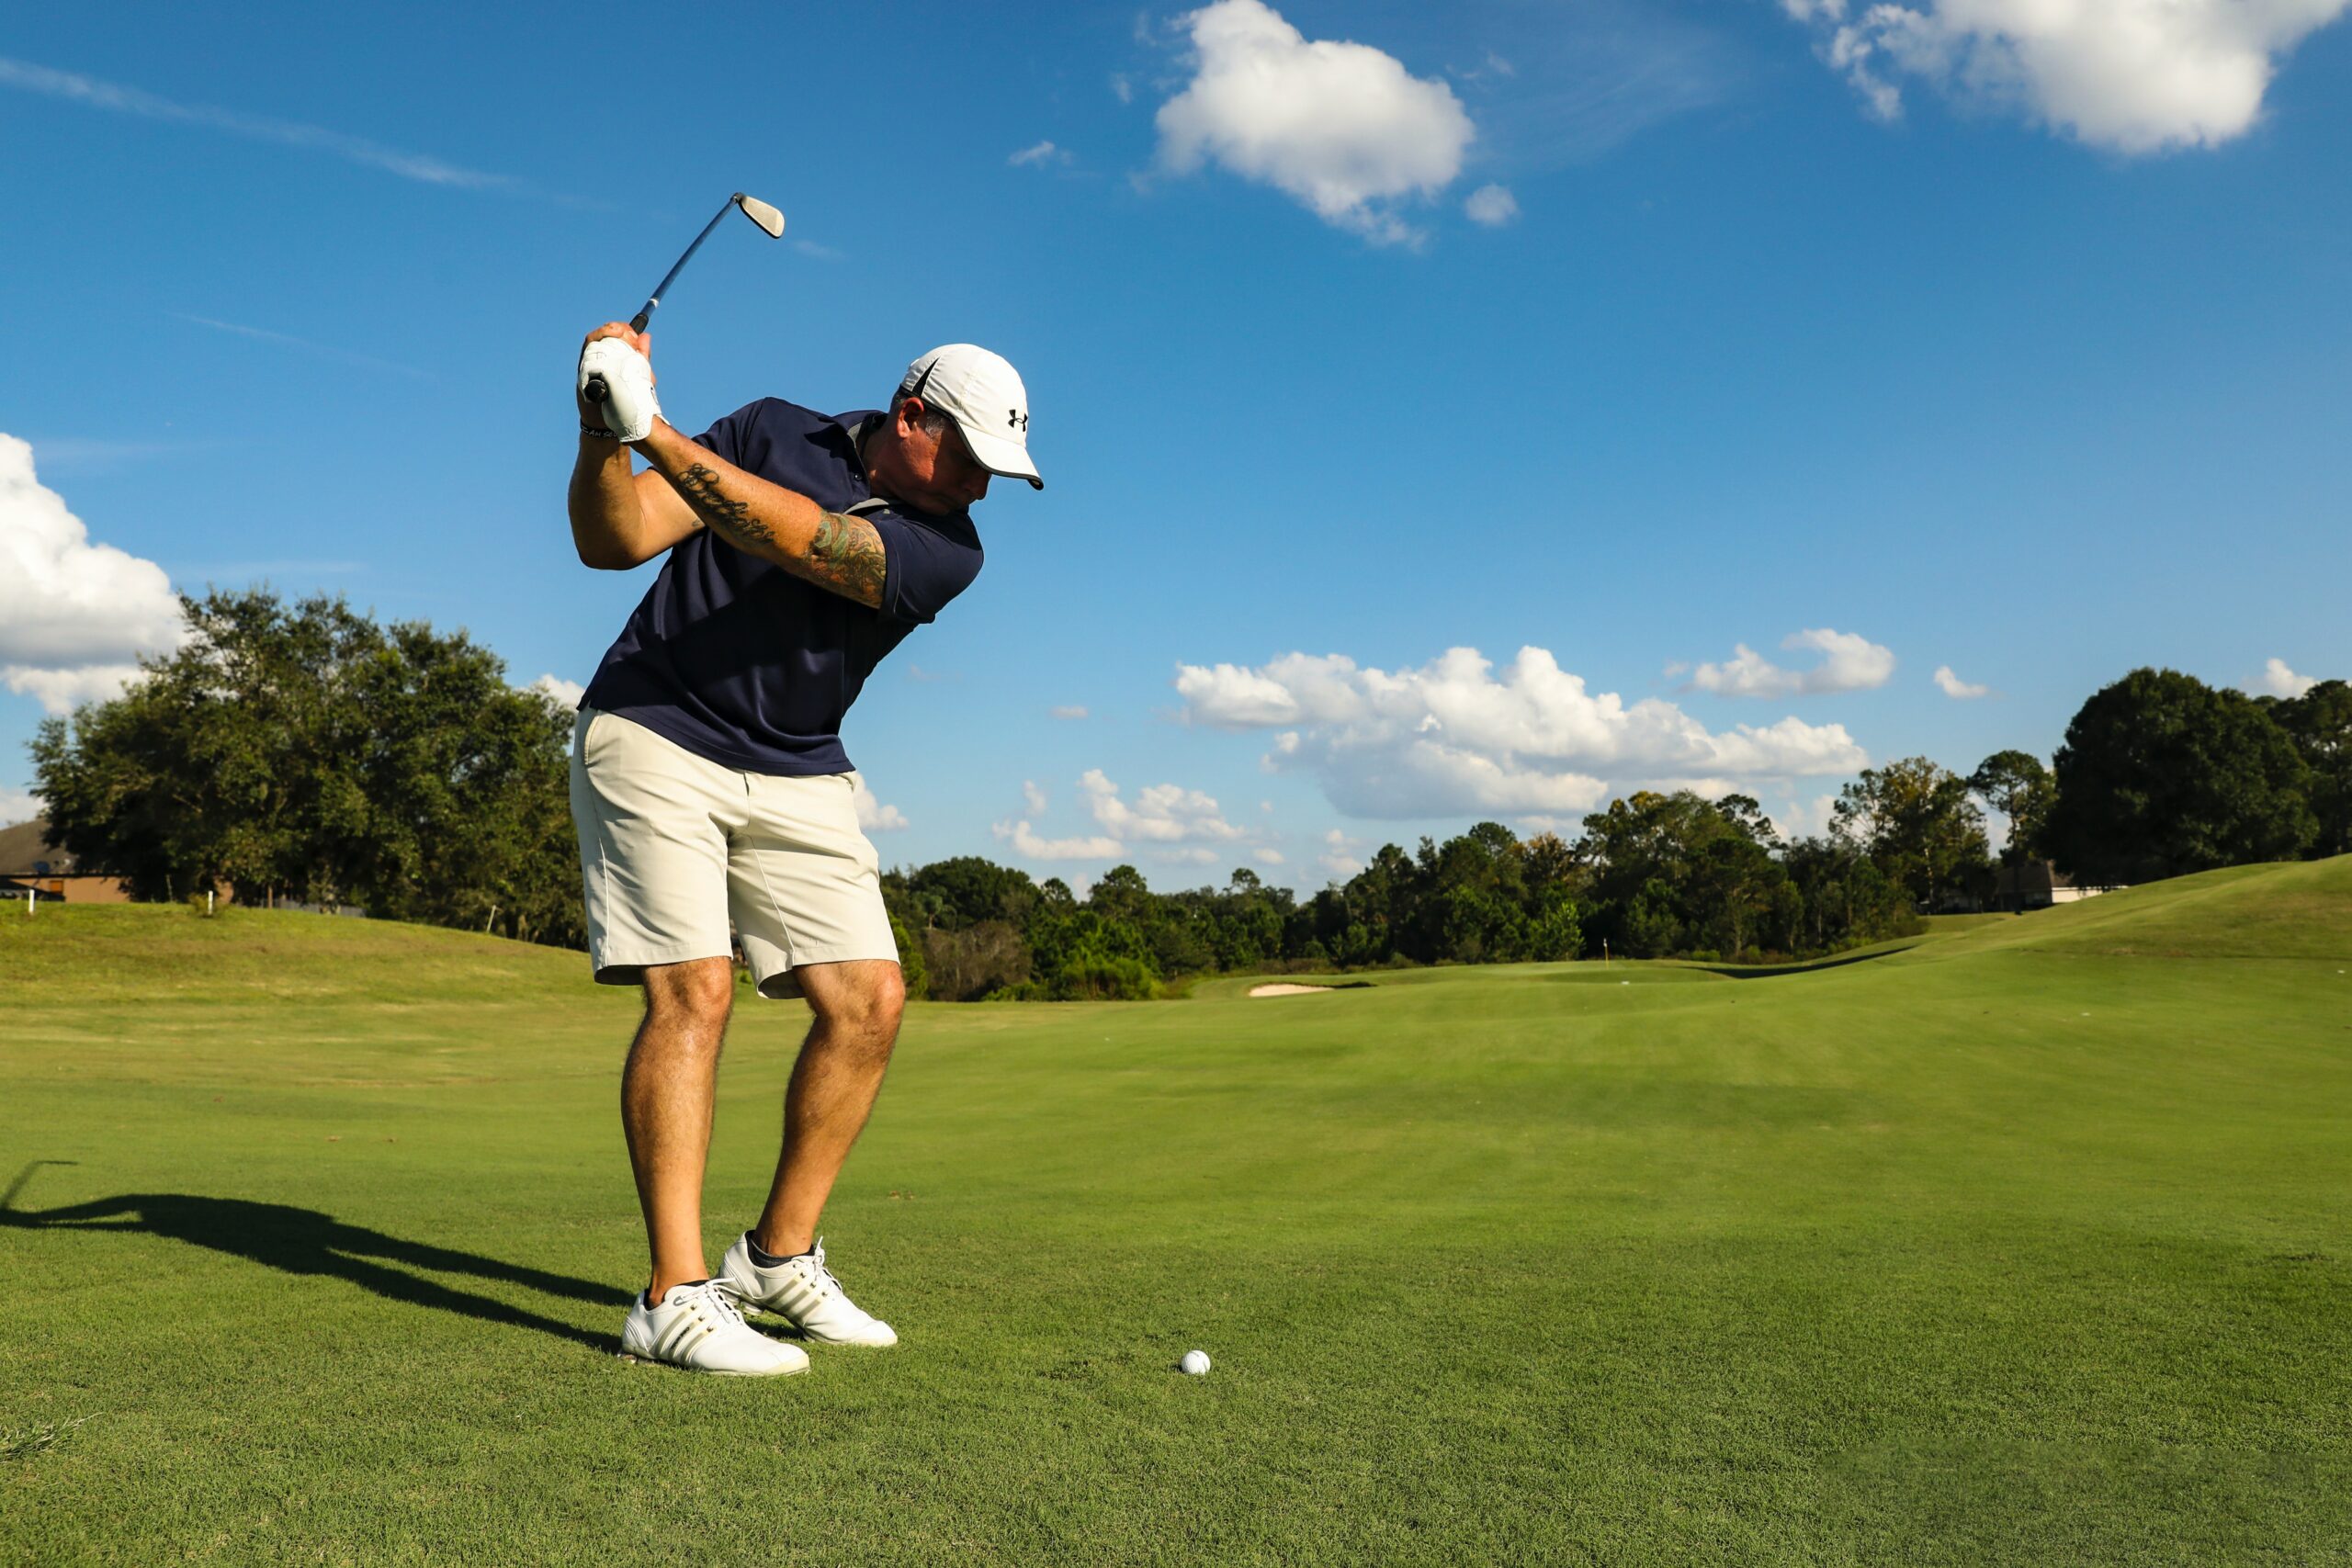 The Best Golfing Apps That All Serious Golfers Need